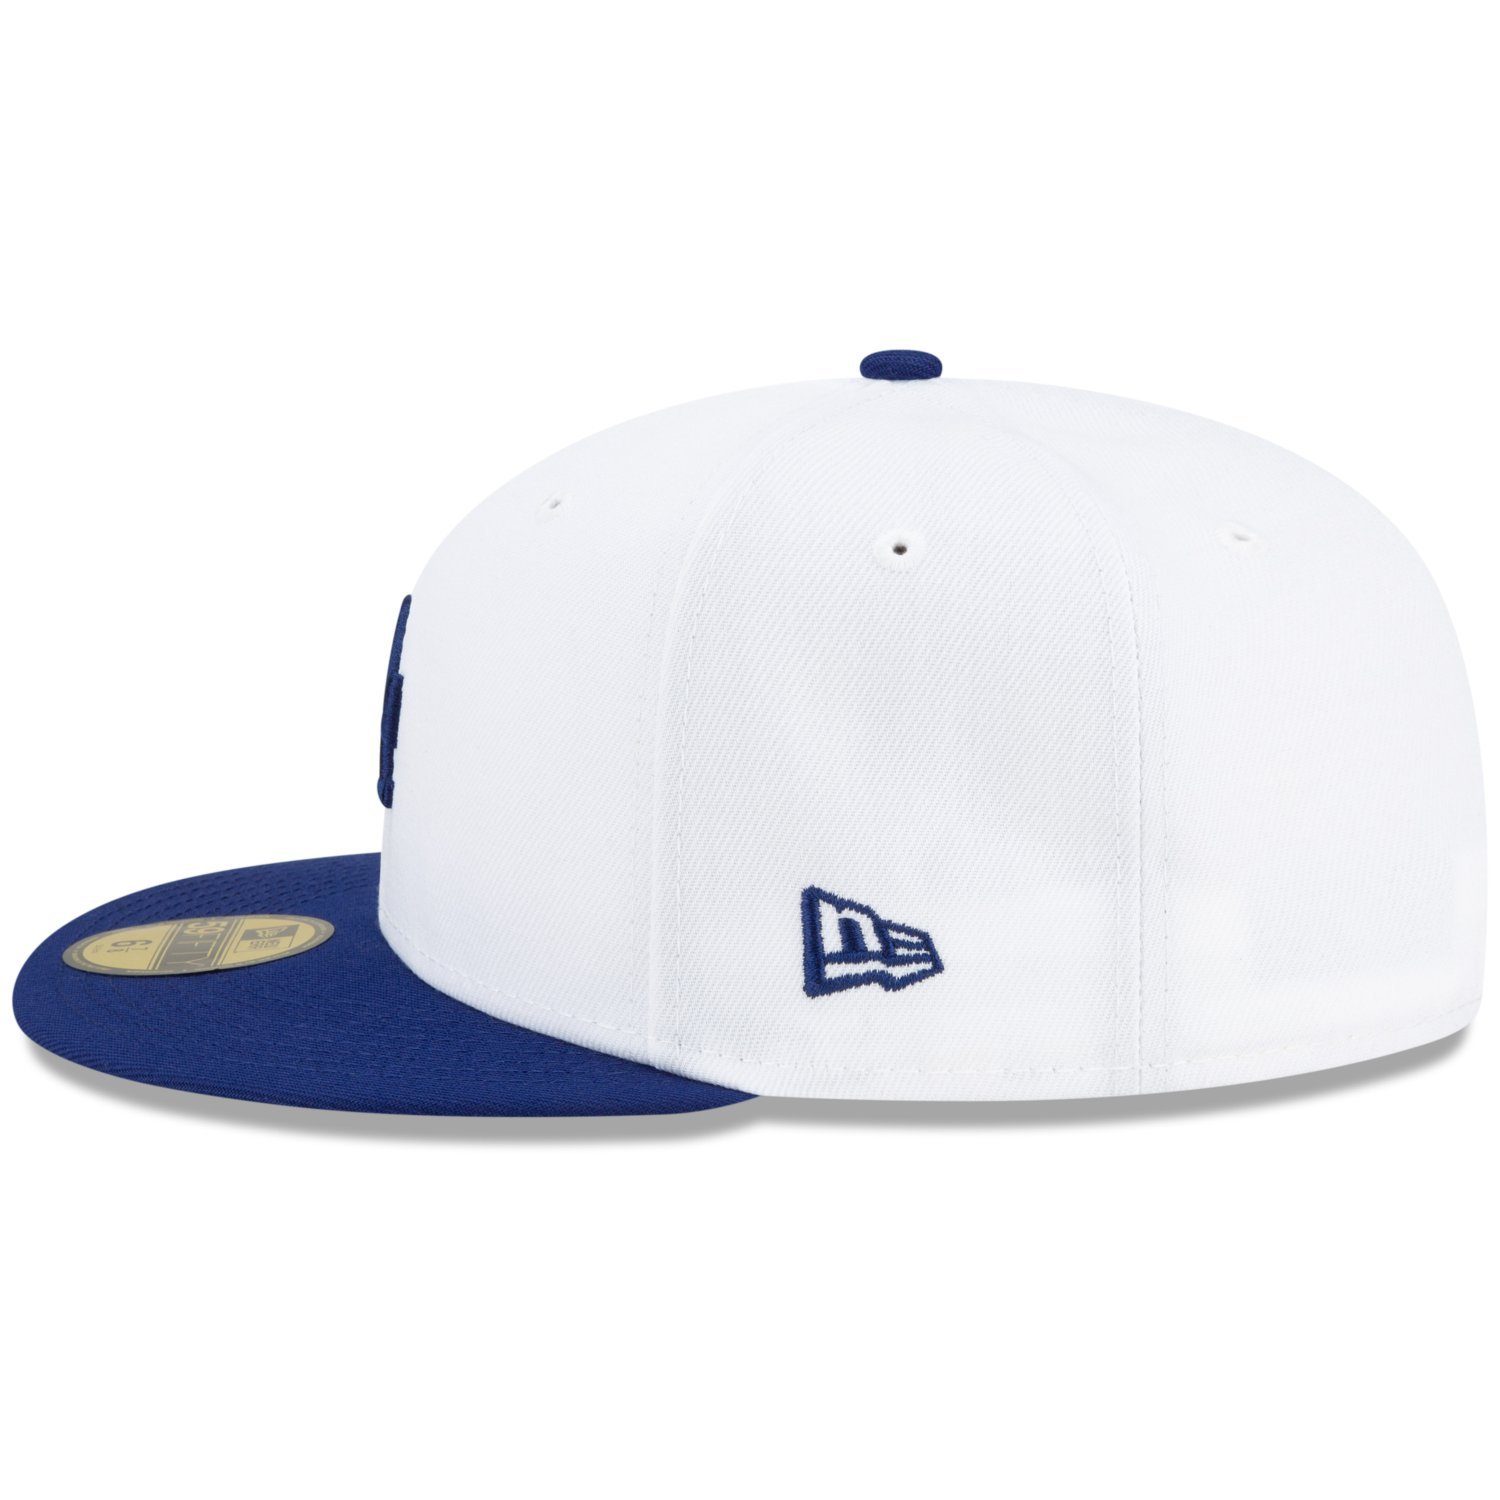 New ANNIVERSARY LA Era Fitted 100th 59Fifty Dodgers Cap